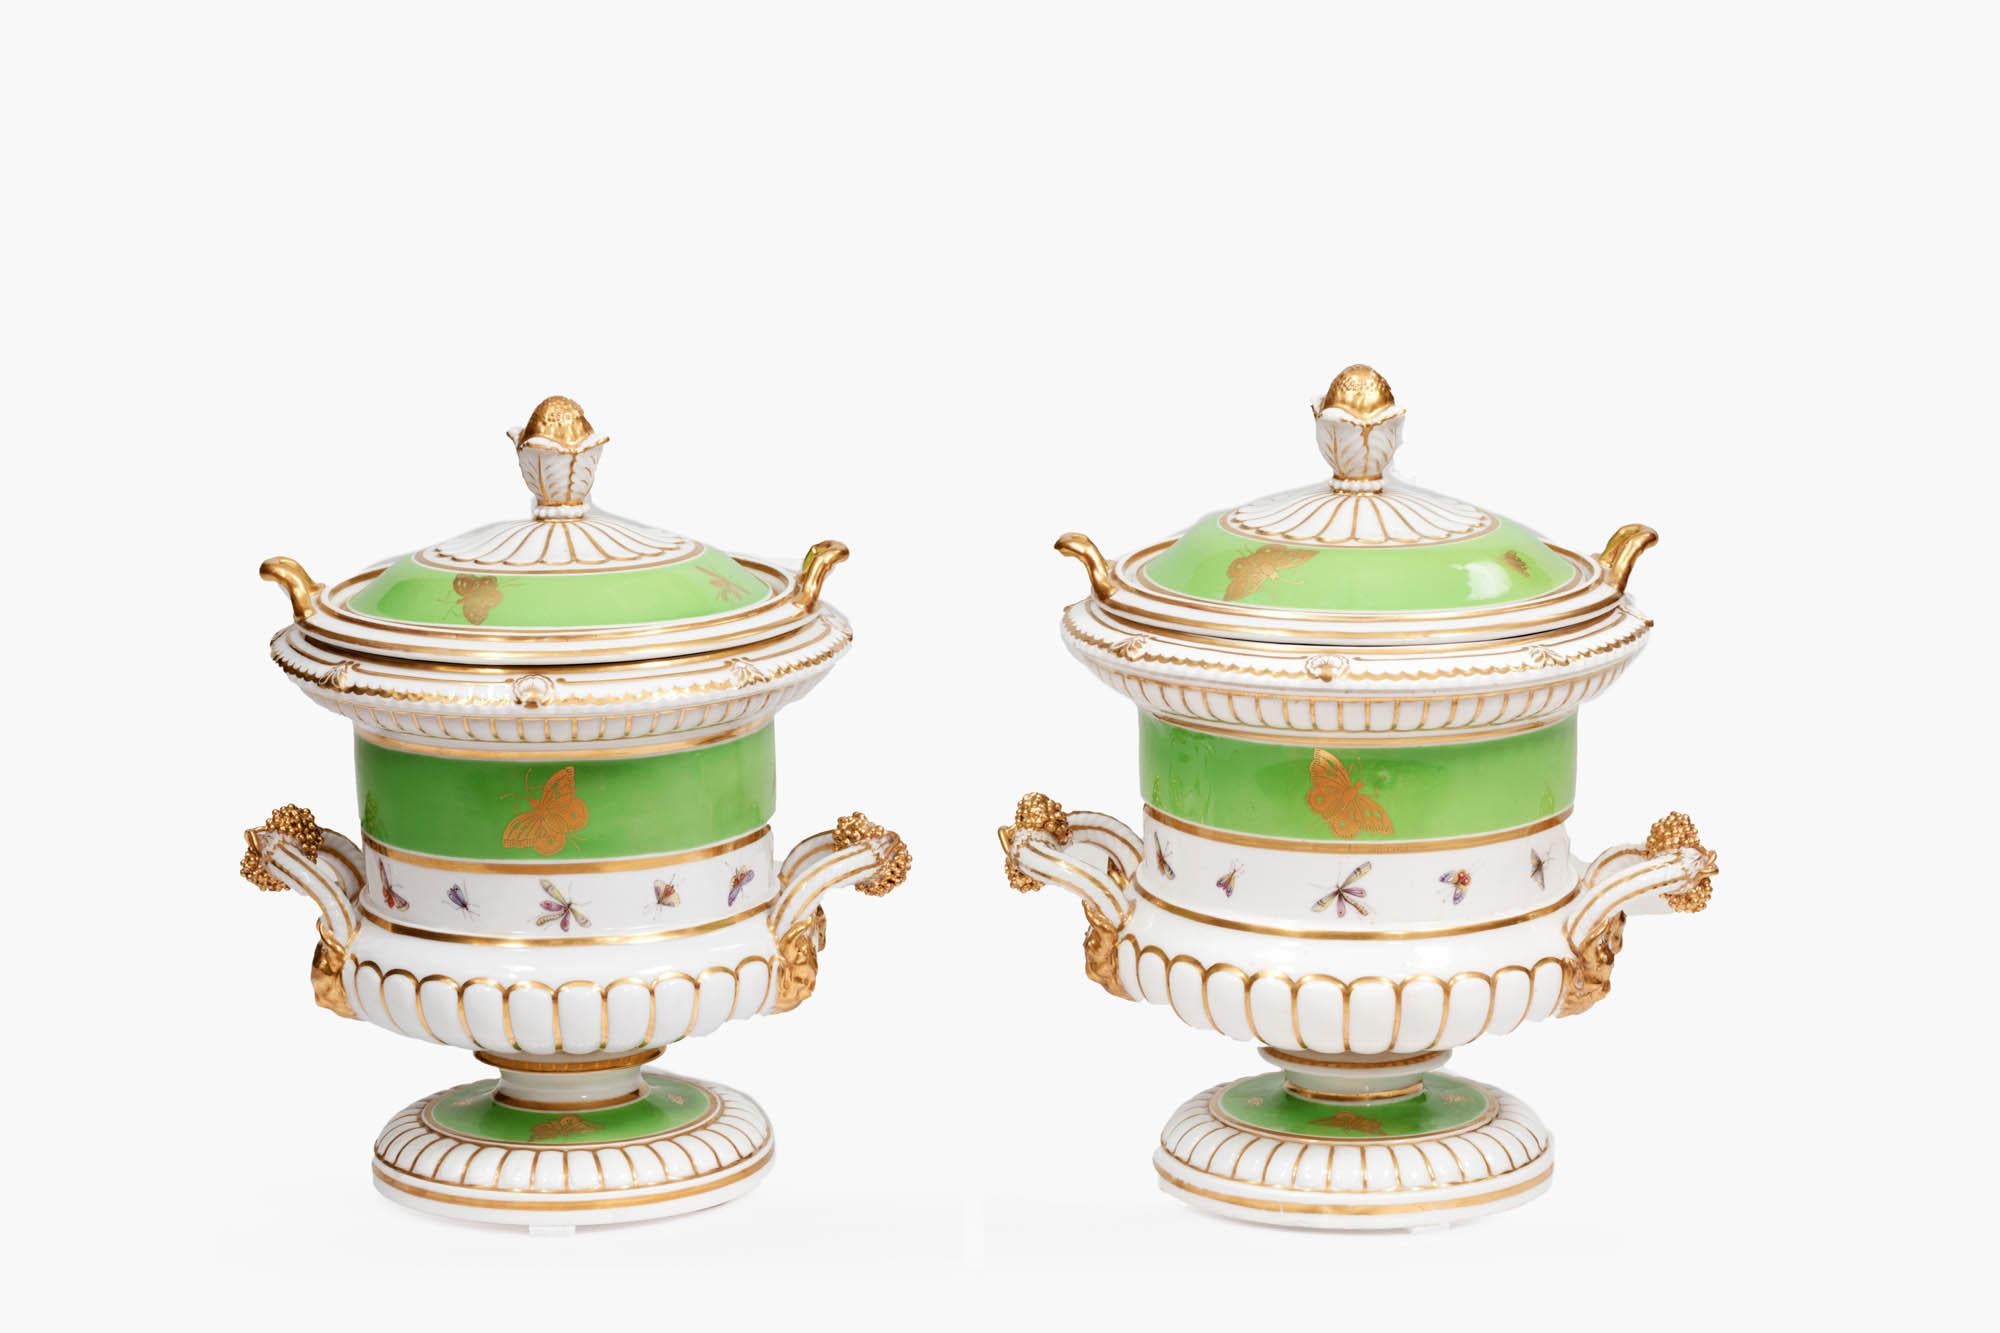 English Pair of 19th Century Green & White Ice Pails by Chamberlain of Worcester